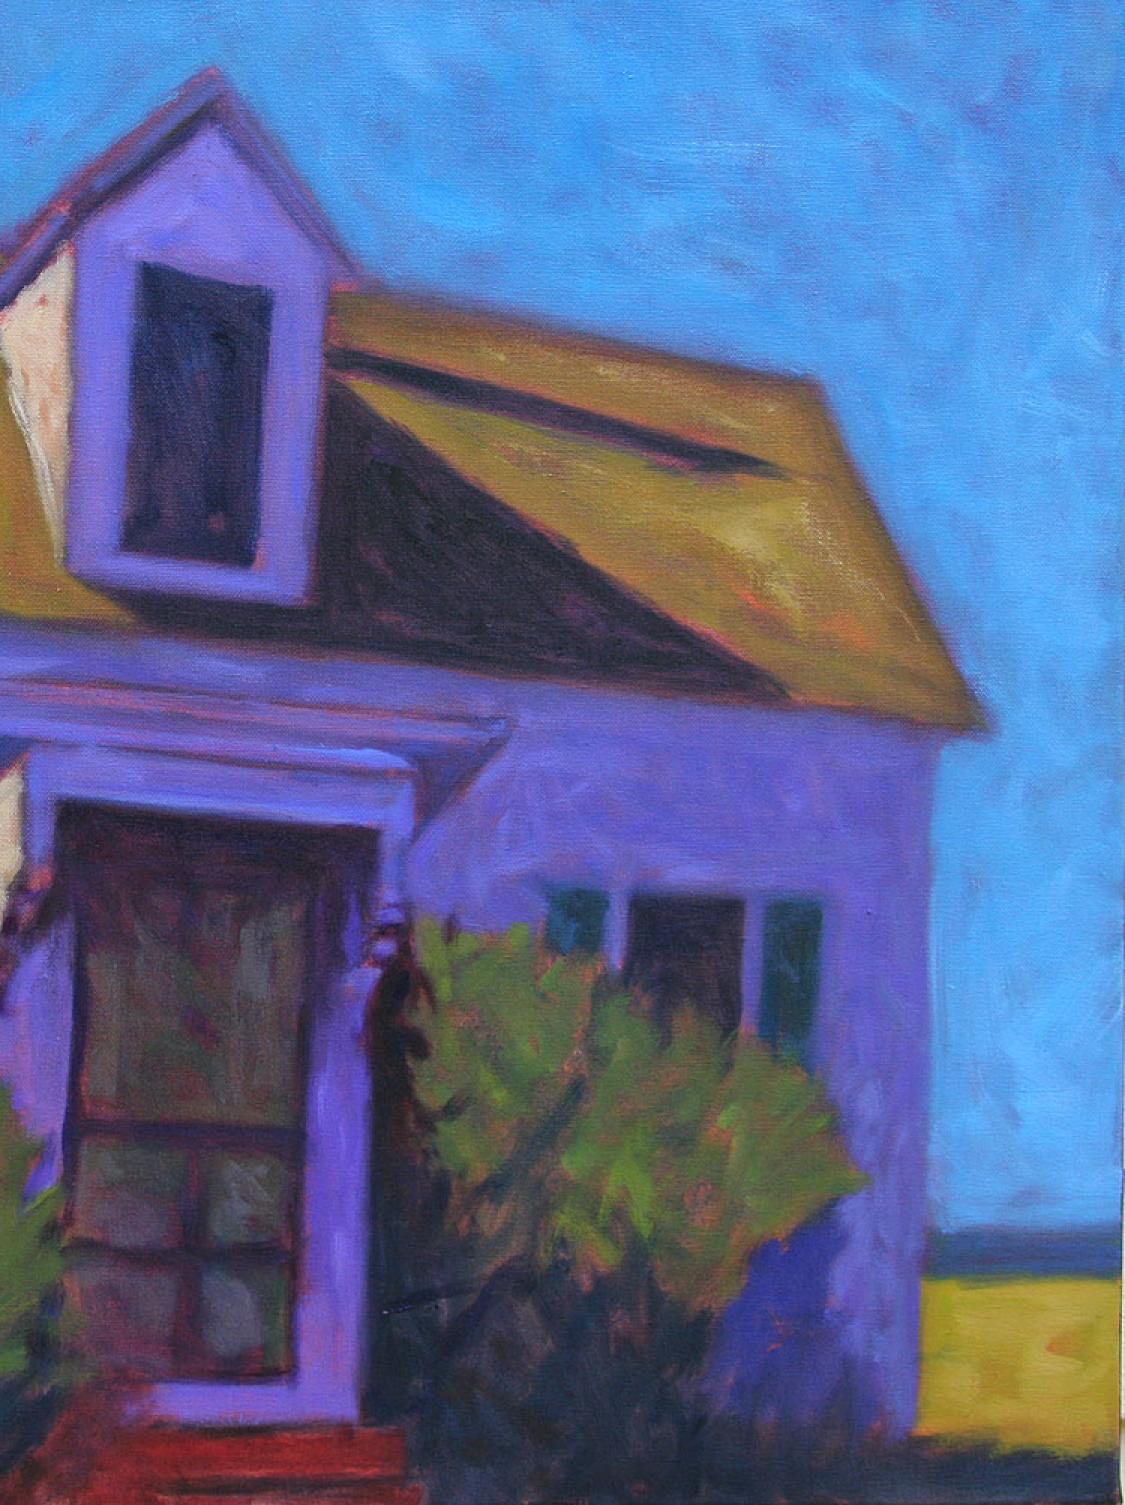 Screen Door  Oil /Canvas  Landscape  Light & Color Architecture   New England  - American Impressionist Painting by Peter Batchelder